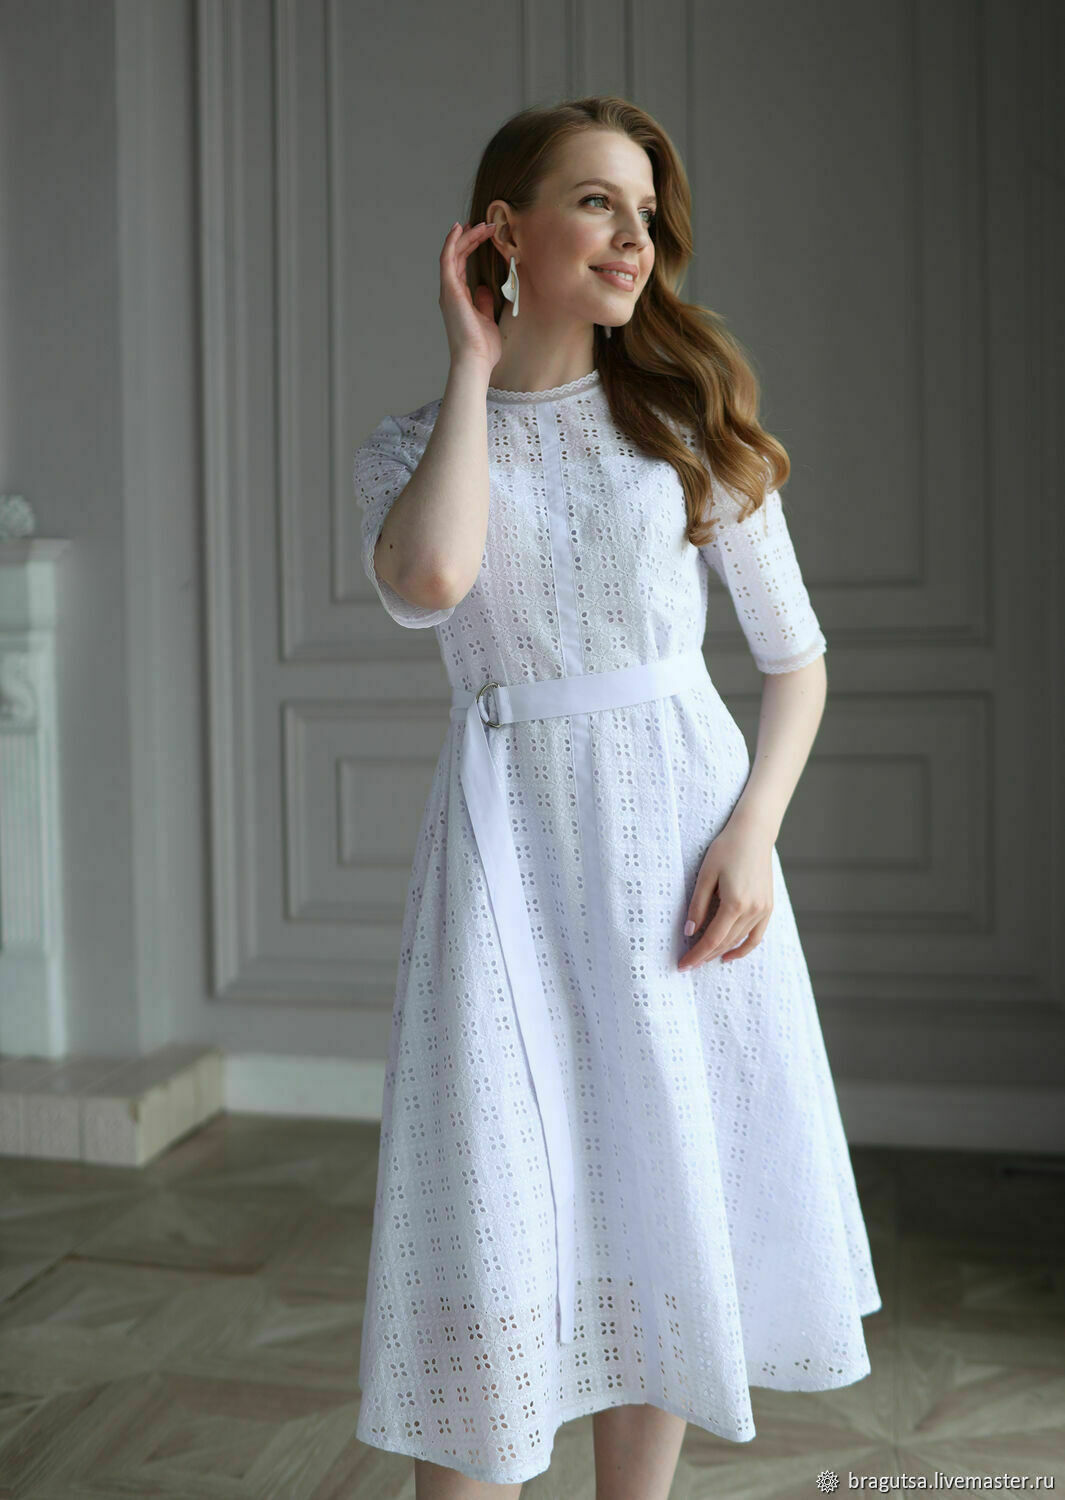 Dress ALEXANDRIA cotton 100% sewing on cotton lining, Dresses, Moscow,  Фото №1